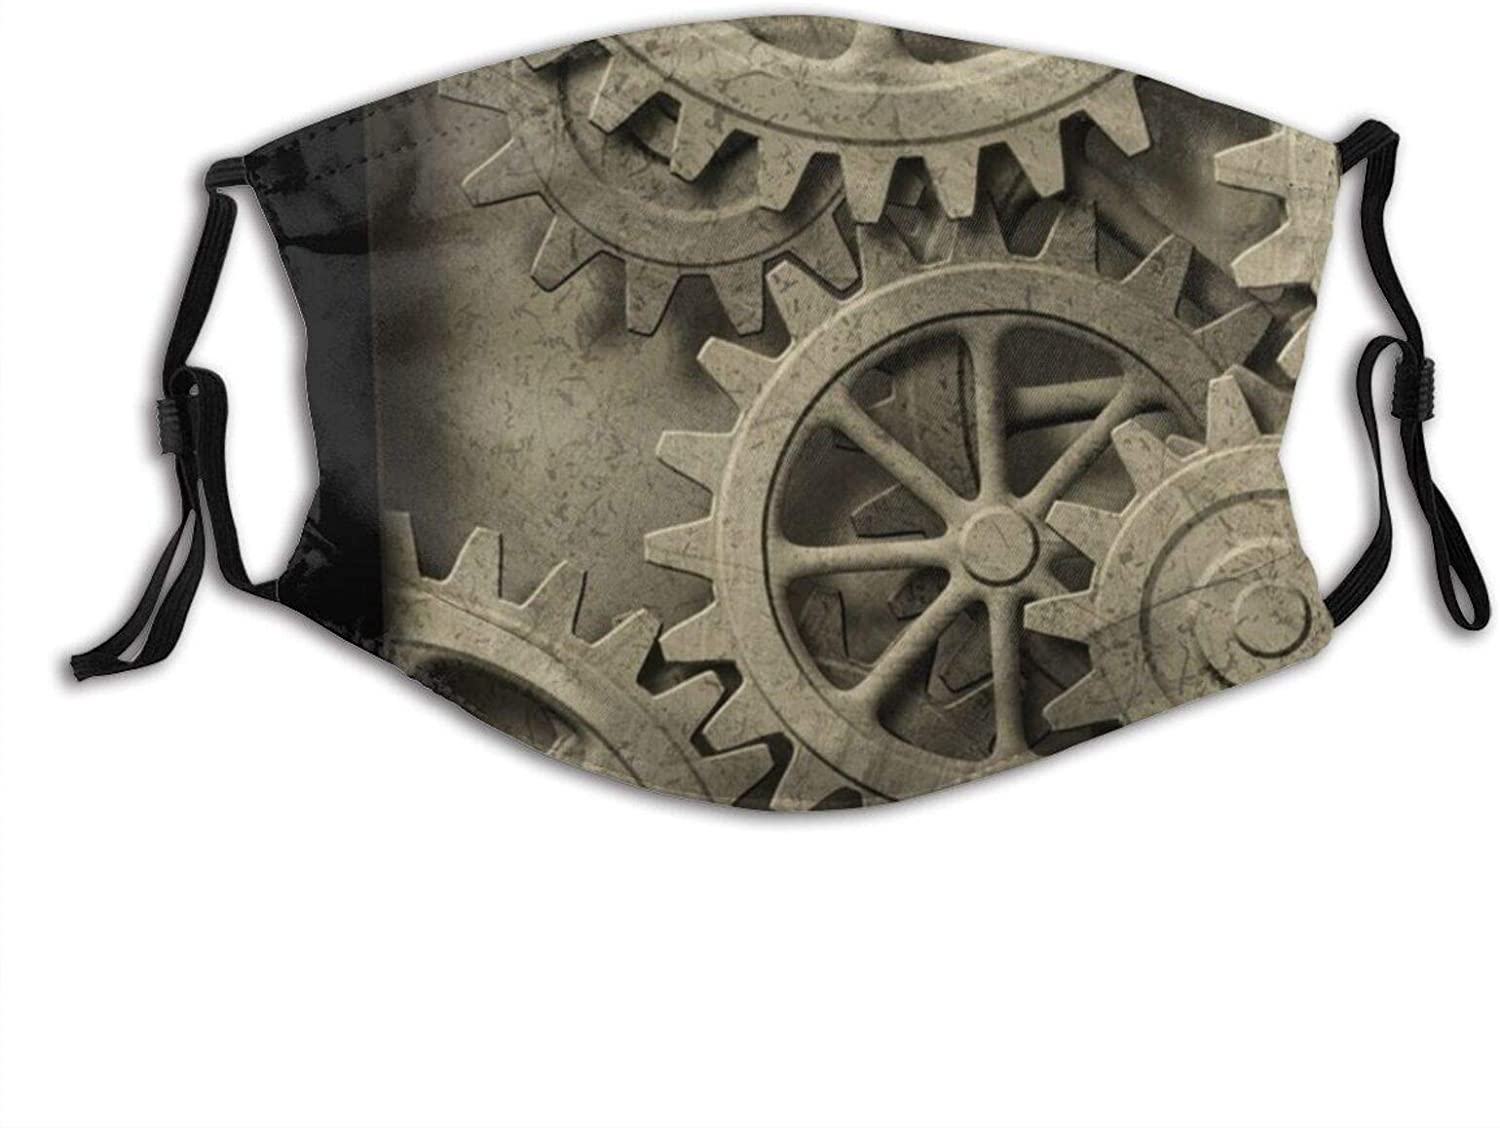 Steampunk Grunge Textures Comfortable Reusable Face Mask, Adjustable Scarf For Adult (With 2 Filters) - Steampunk Cogwheels